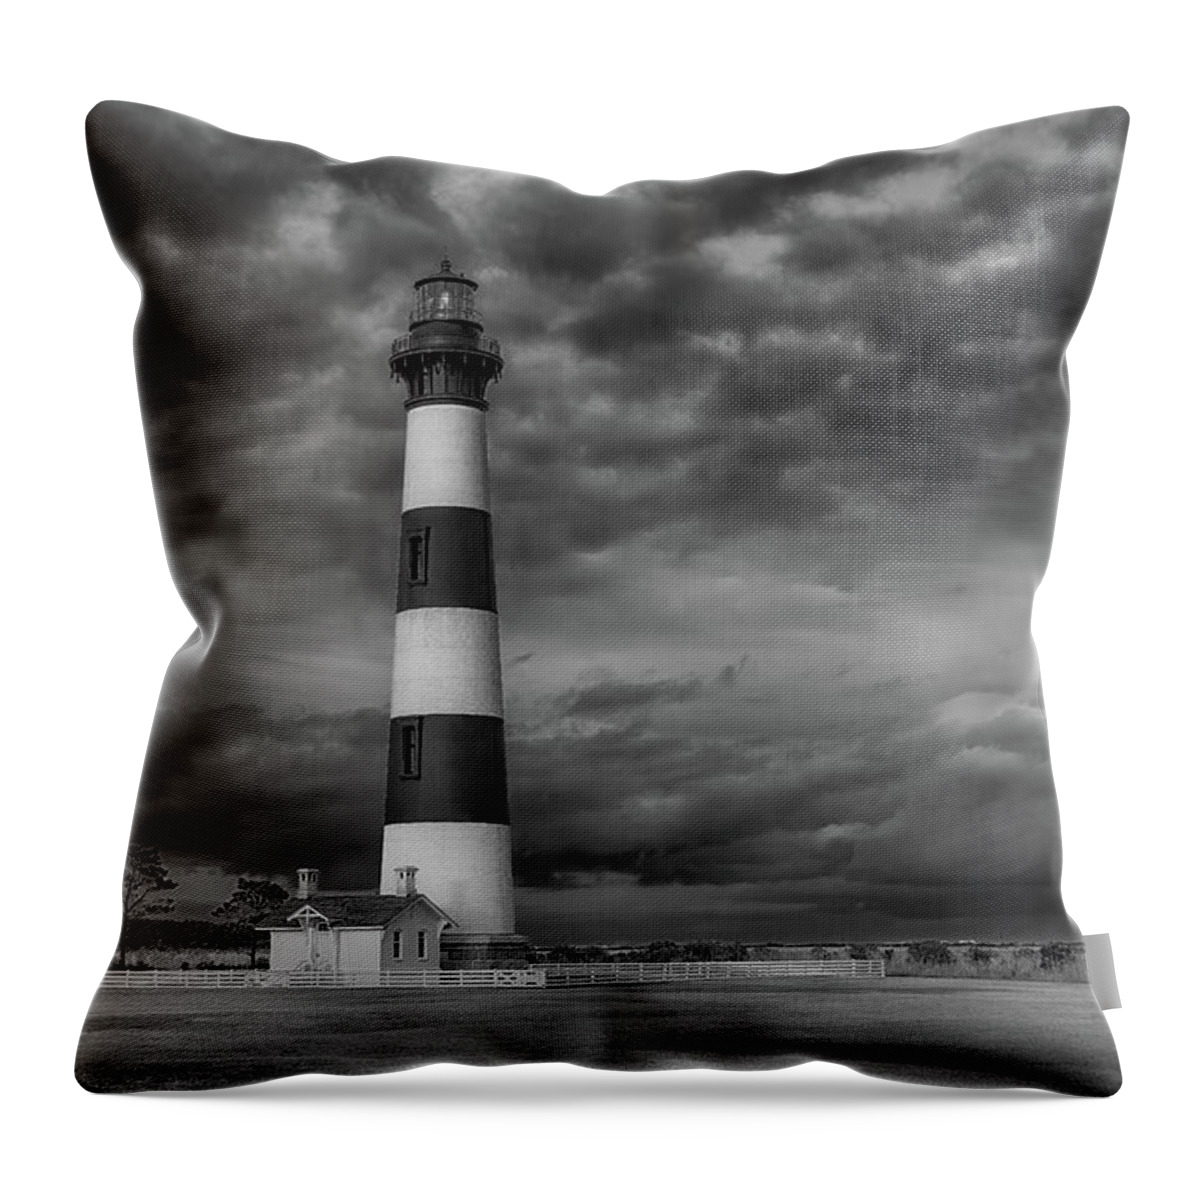 Bodie Island Lighthouse Throw Pillow featuring the photograph Bodie Island Lighthouse Moody Skies by Fon Denton